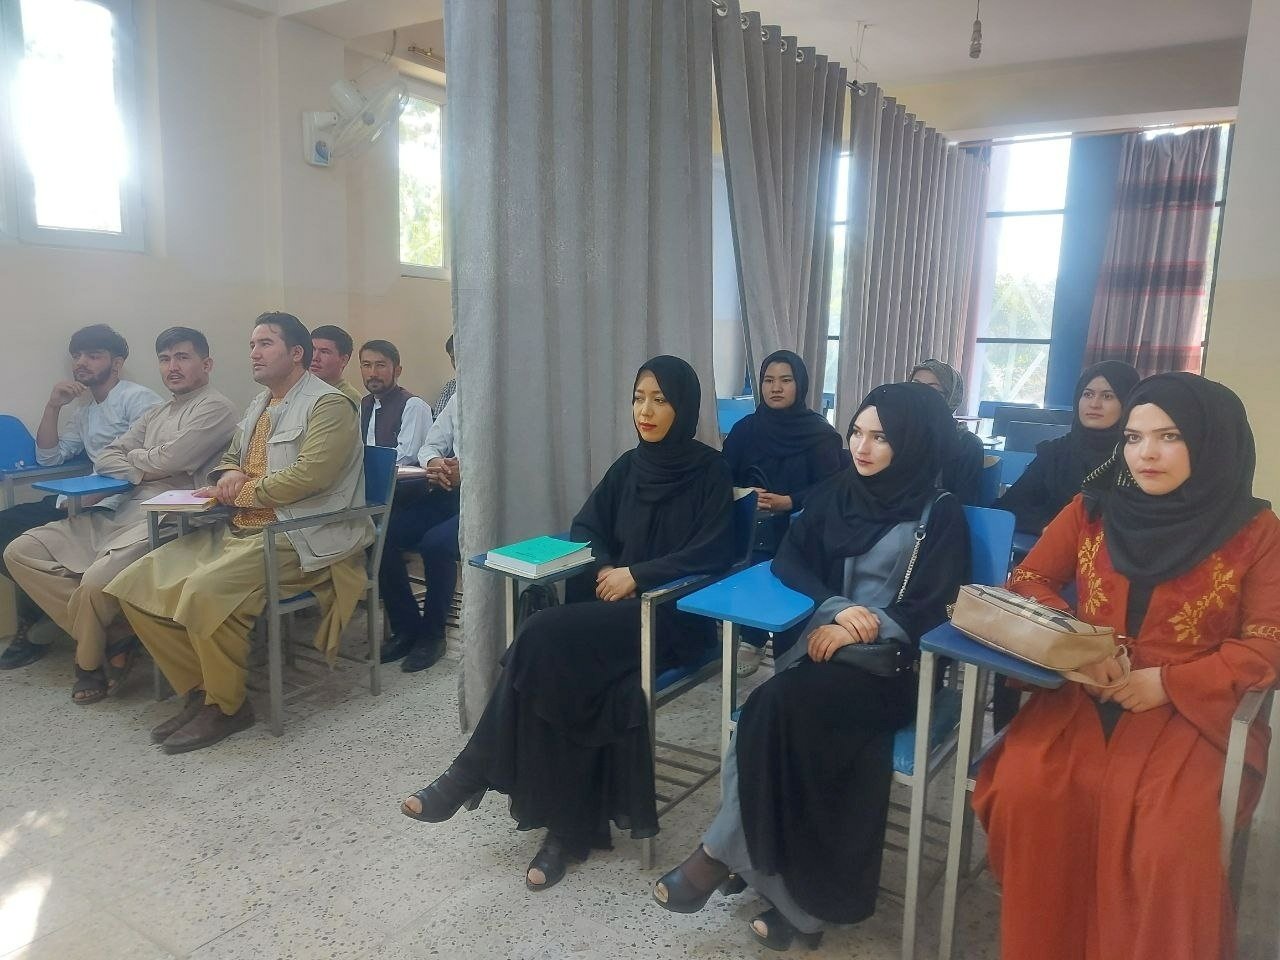 In this picture obtained from social media, students attend class under new classroom conditions at Avicenna University in Kabul, Afghanistan Sept. 6, 2021. (Reuters)